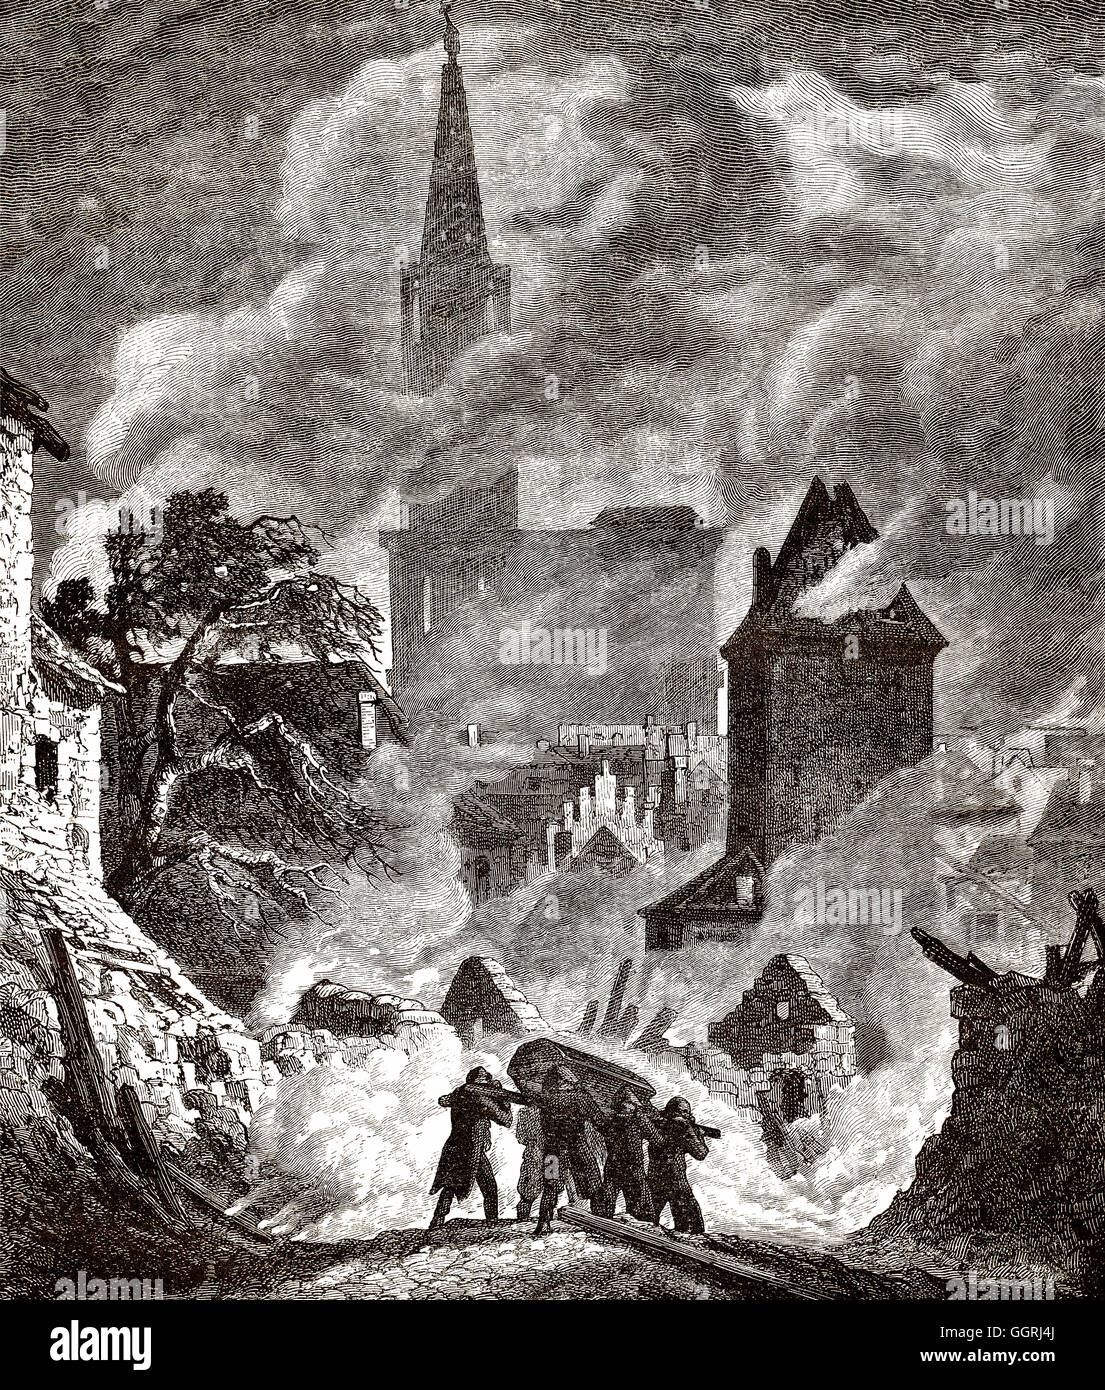 The siege and bombardment of Strasbourg, 1870 Stock Photo